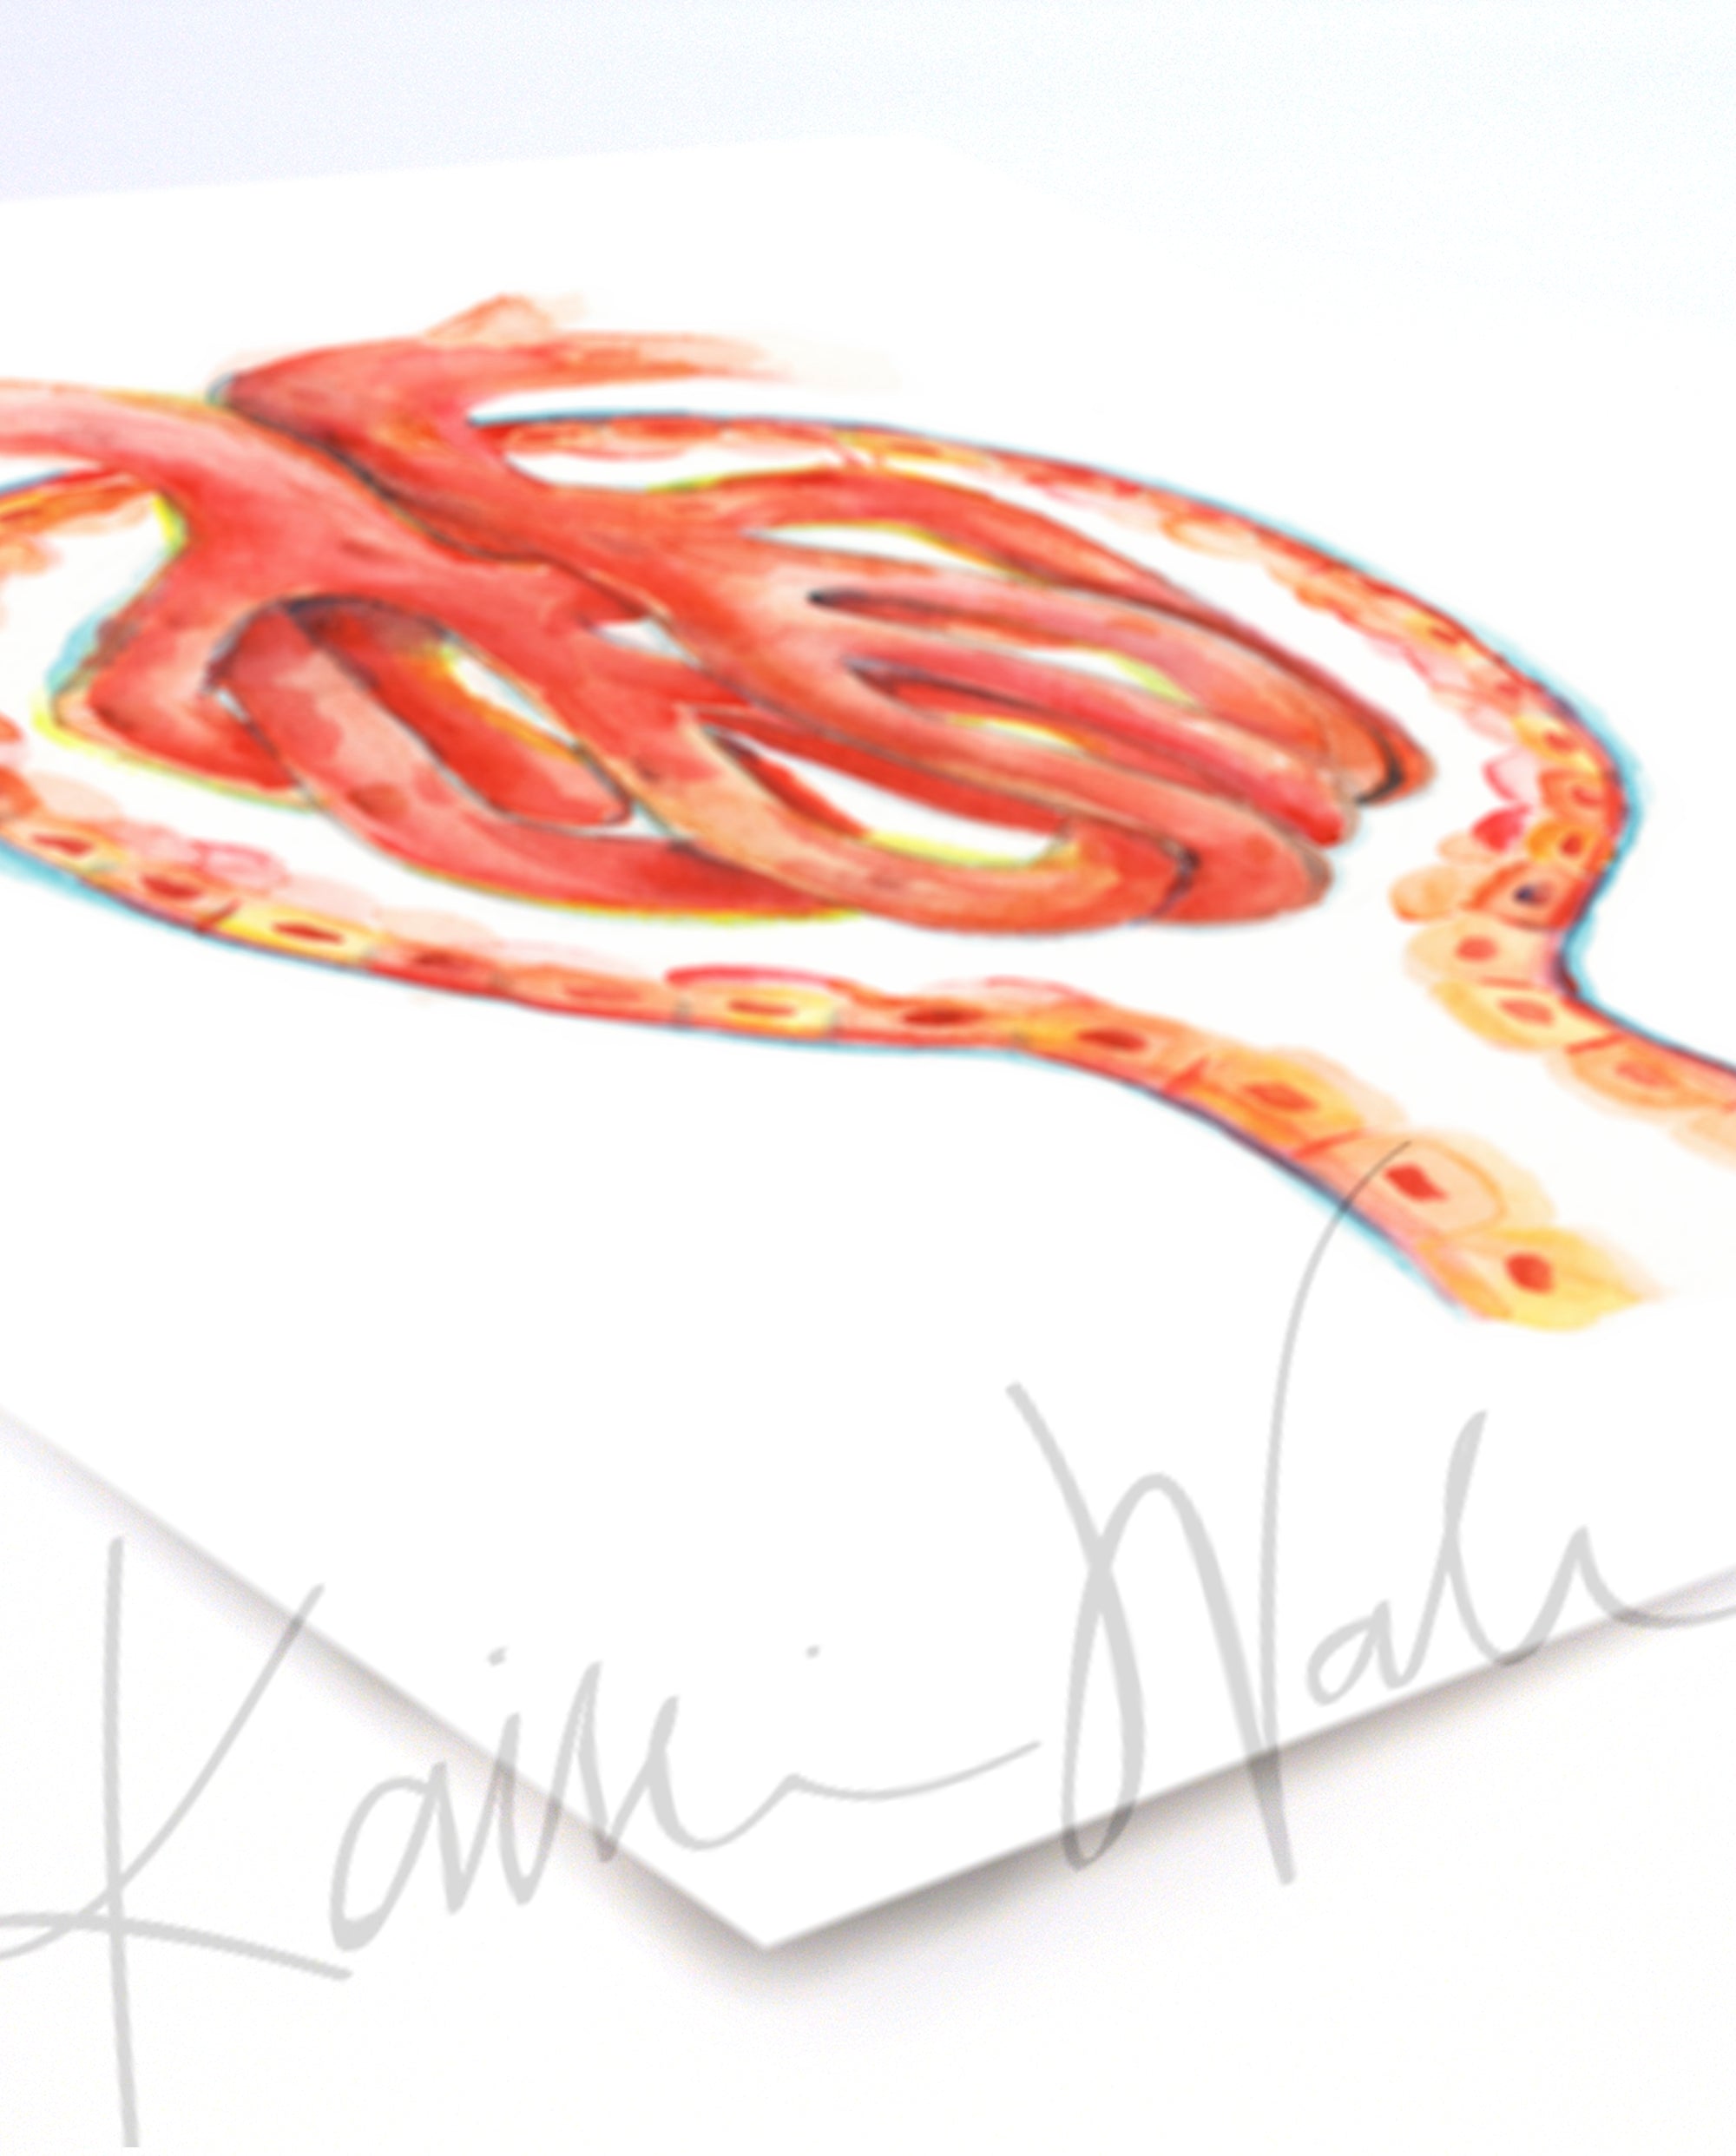 Watercolor painting of a glomerulus in scarlets, oranges, and yellows. The painting is at an angle.